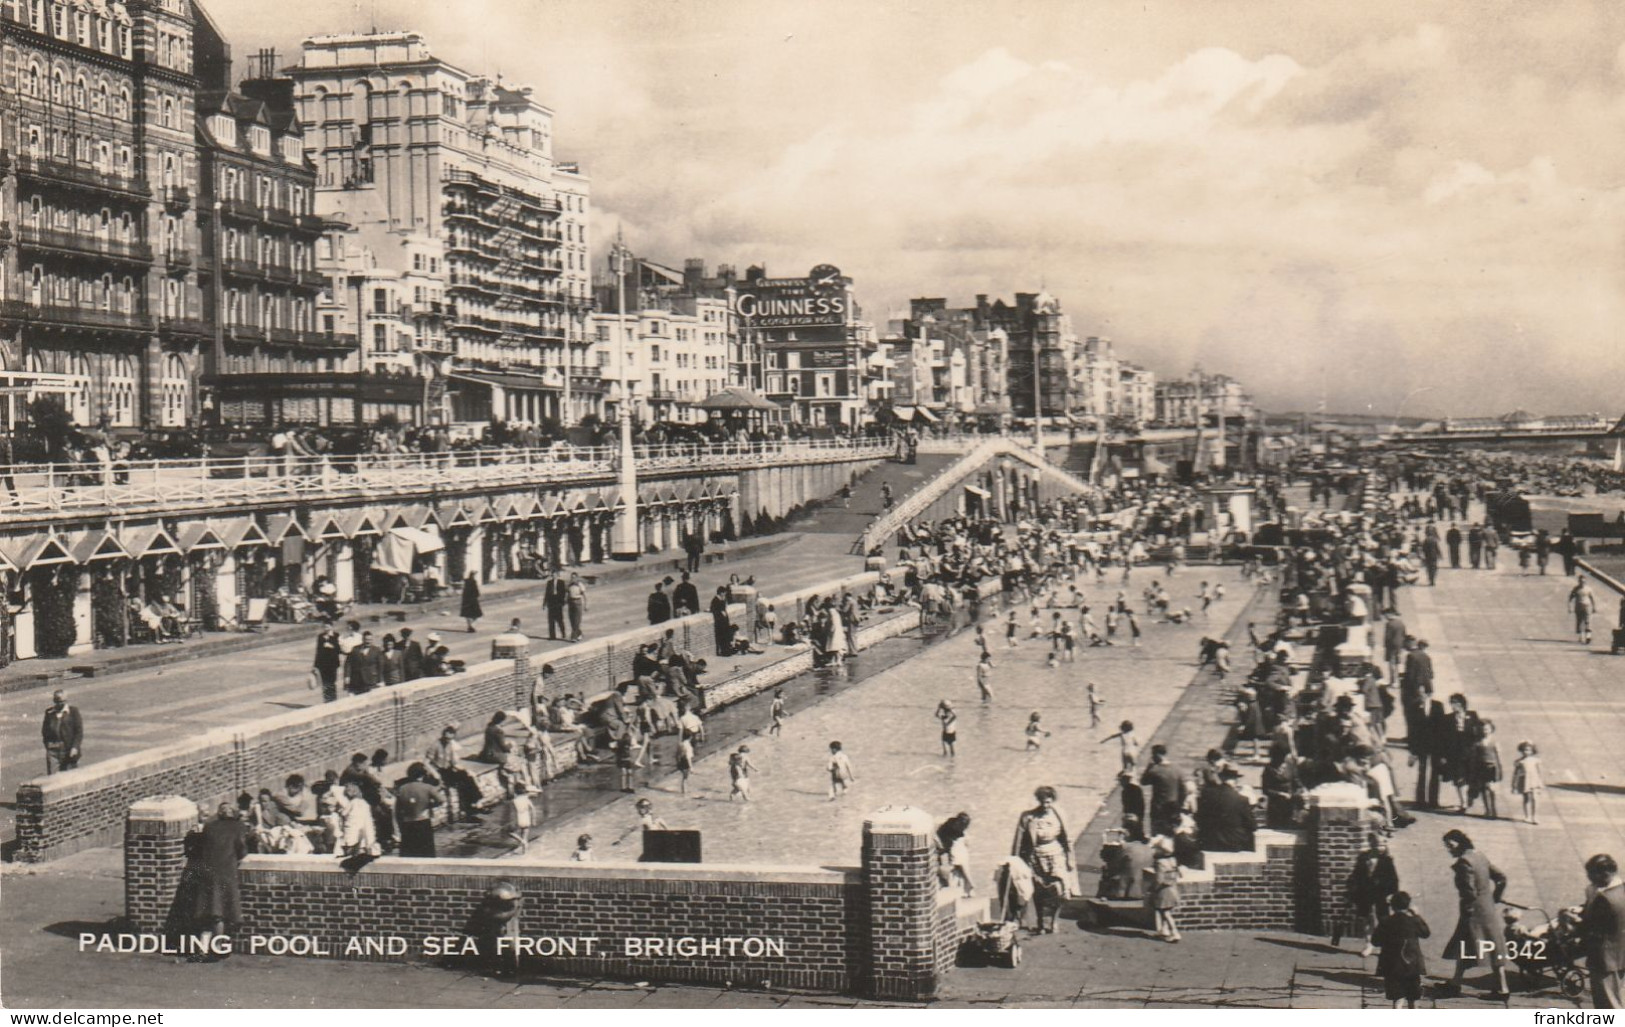 Postcard - Paddling Pool And Sea Front, Brighton - Card No.lp342 - VERY GOOD - Unclassified